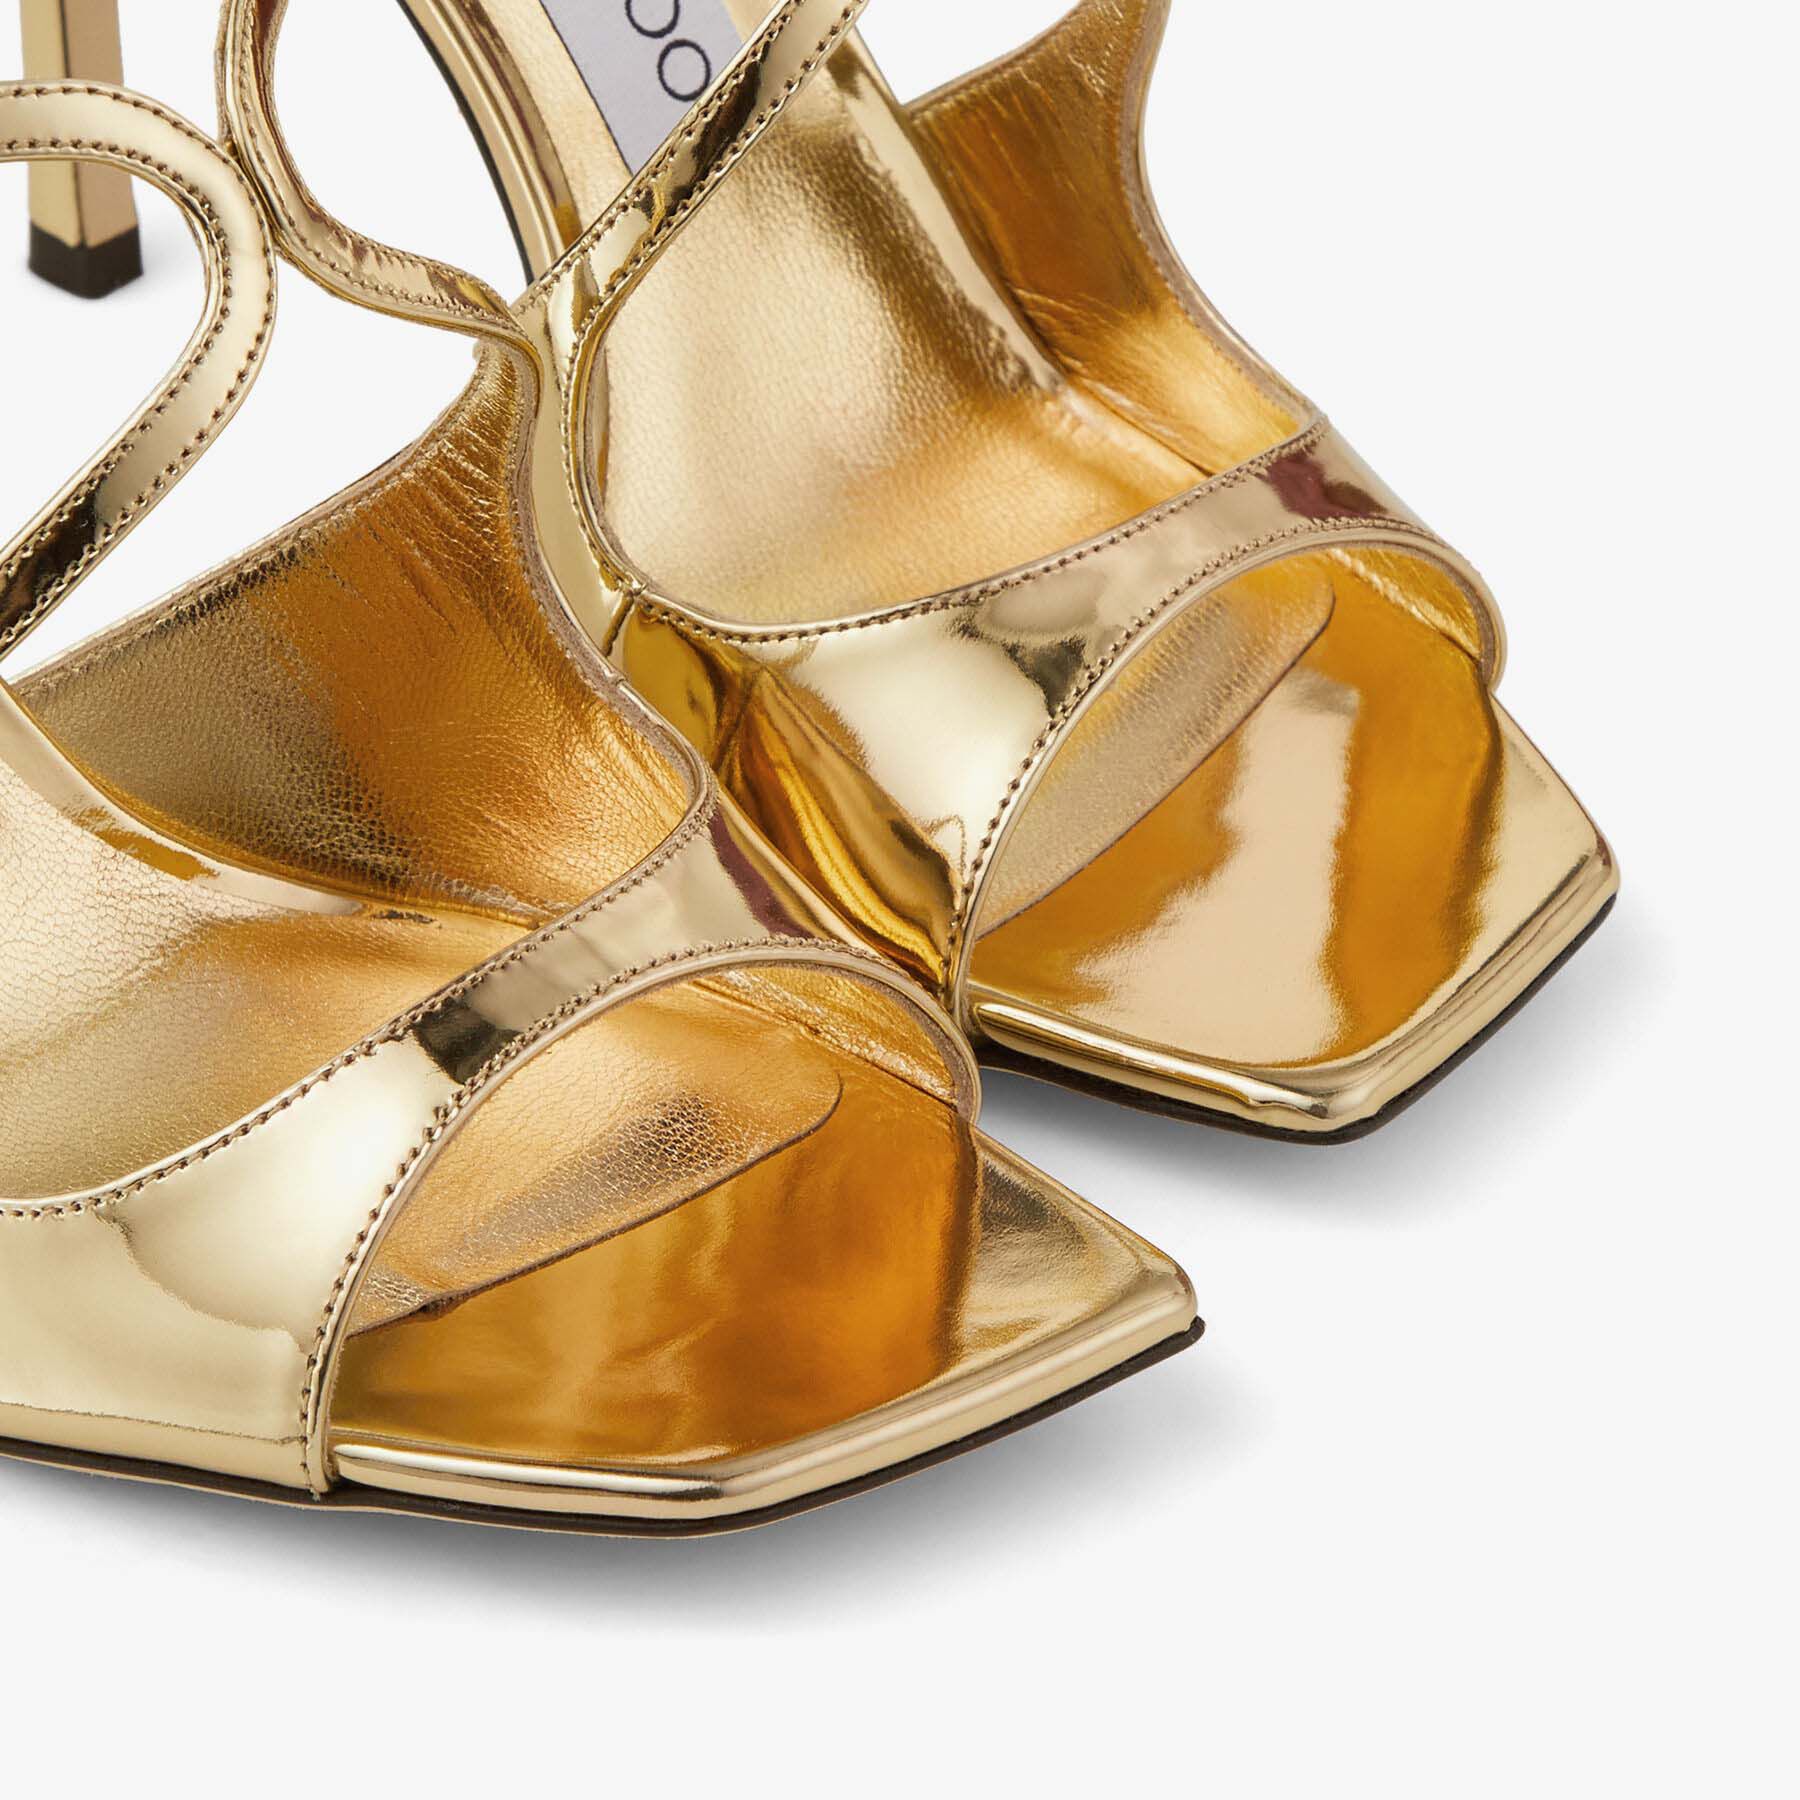 Gold Liquid Metal Leather Mules | ANISE 95 | Winter 2021 Collection ...